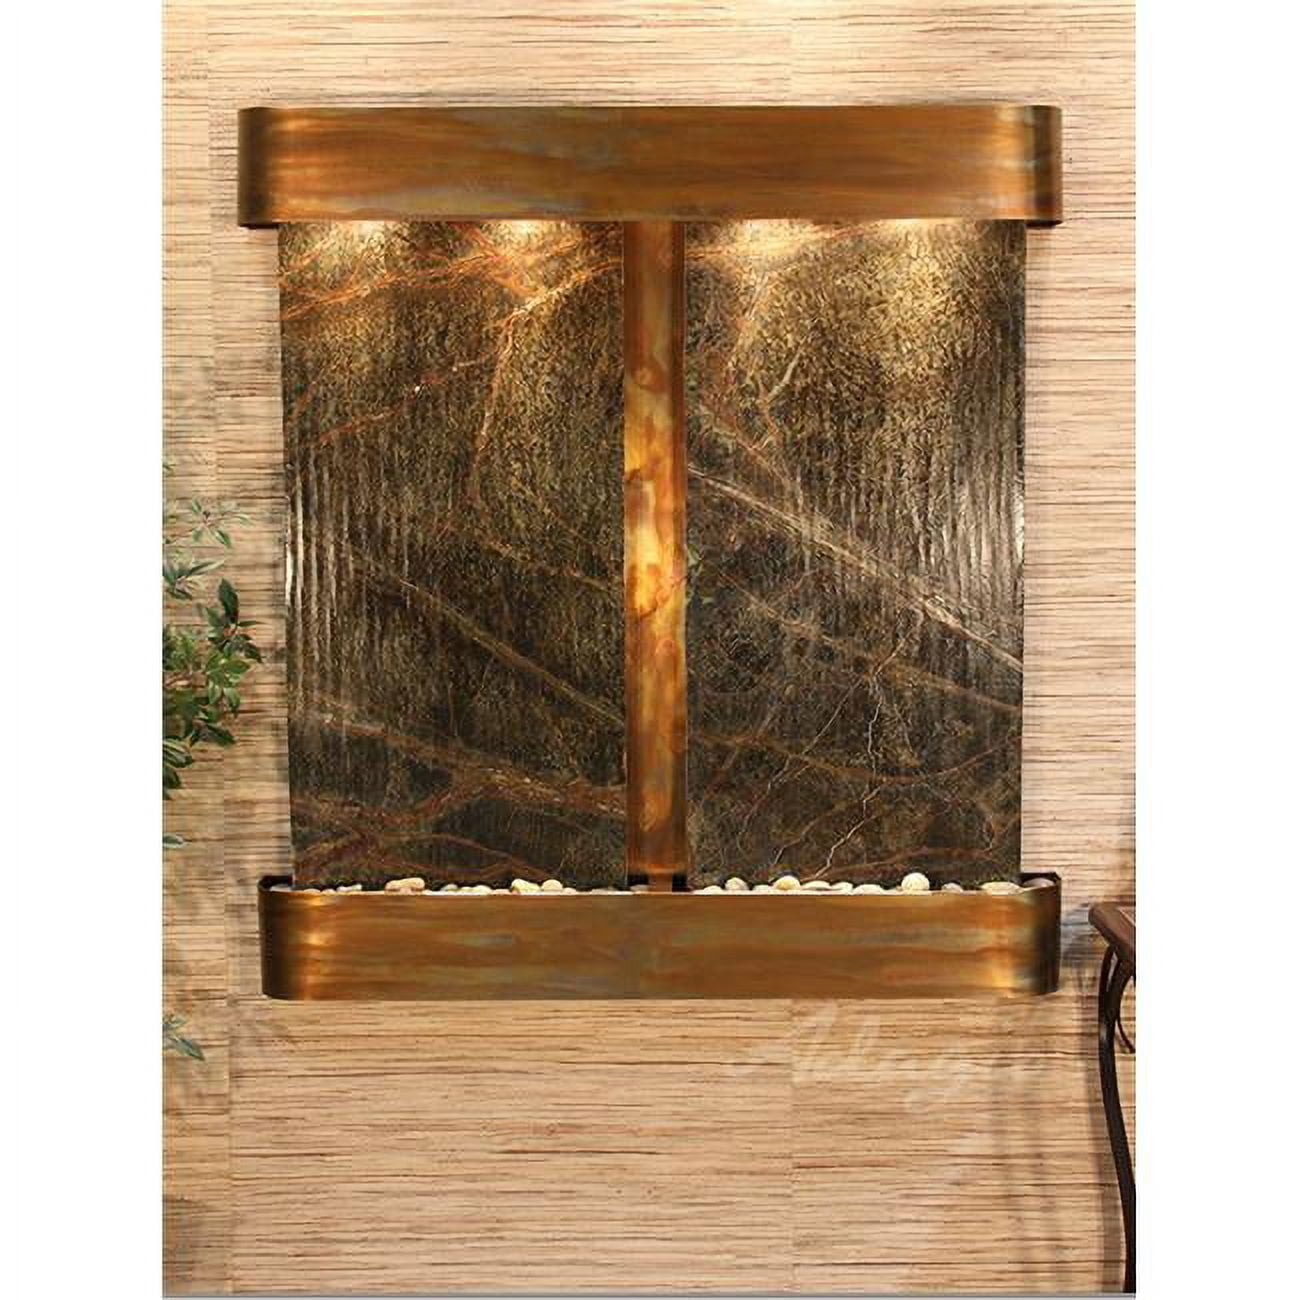 Picture of Adagio AFR1005 Aspen Falls Round Wall Fountain - Rustic Copper-Green Marble